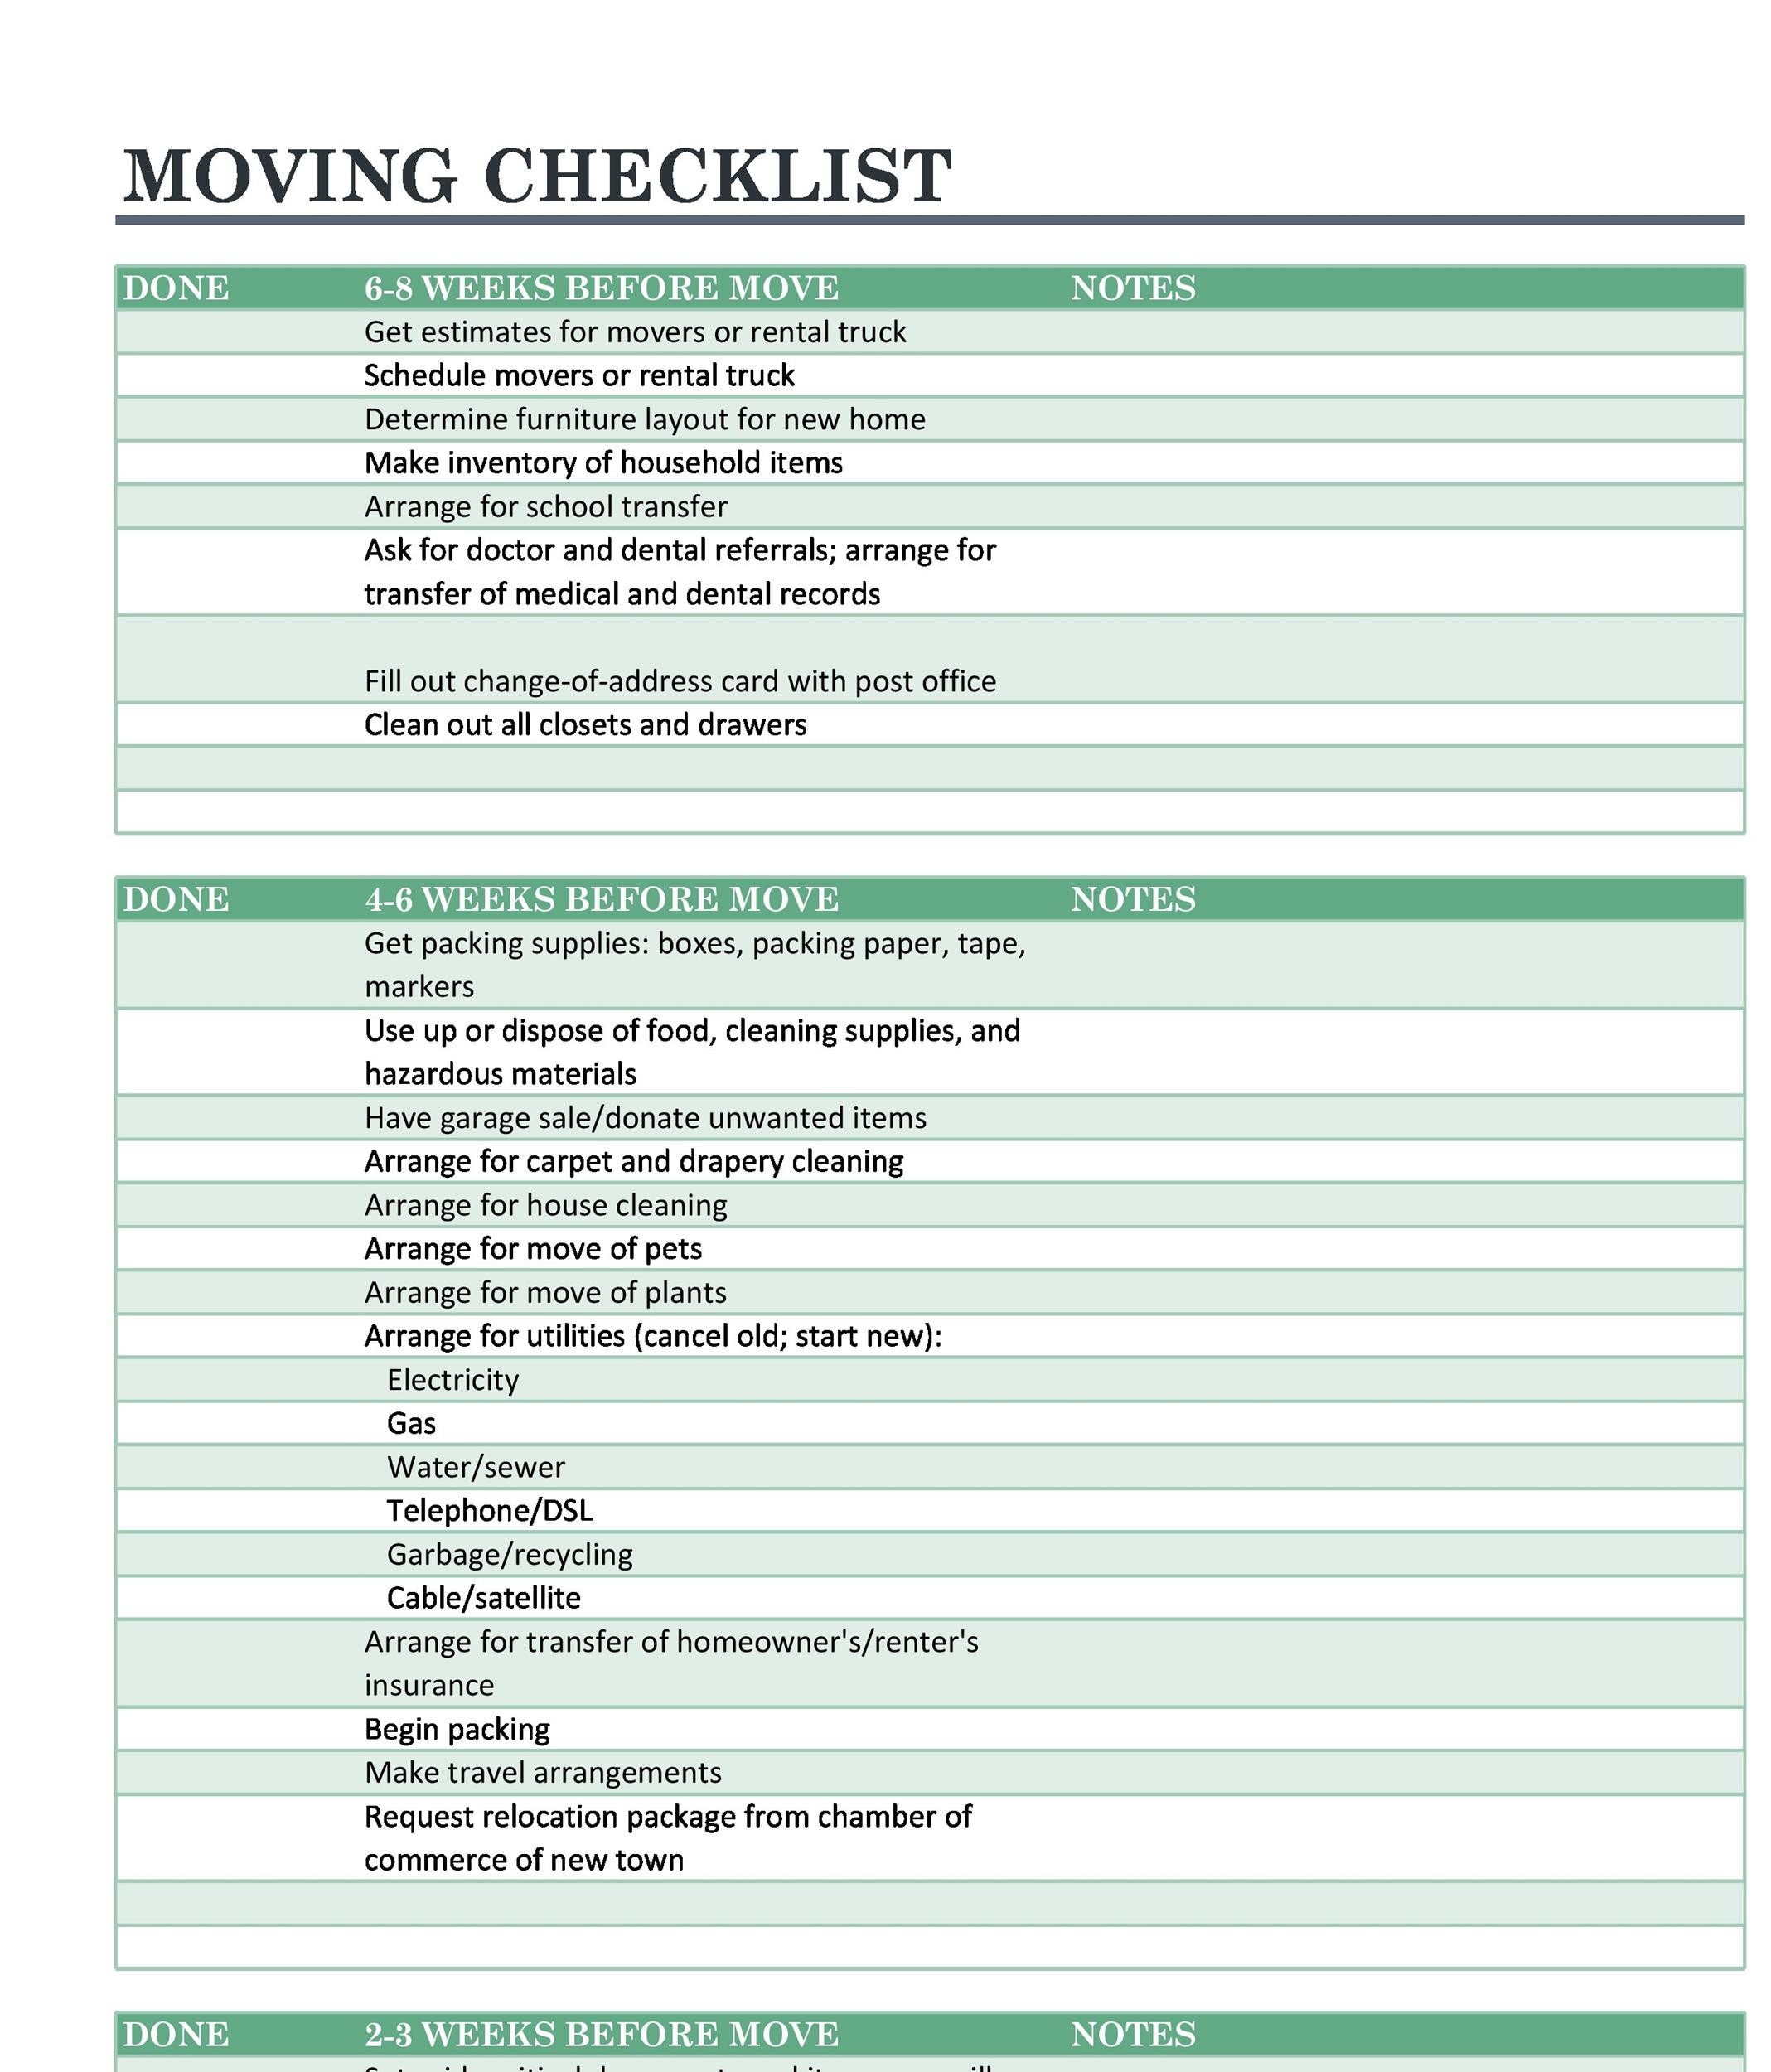 45 Great Moving Checklists [Checklist for Moving In / Out] ᐅ TemplateLab